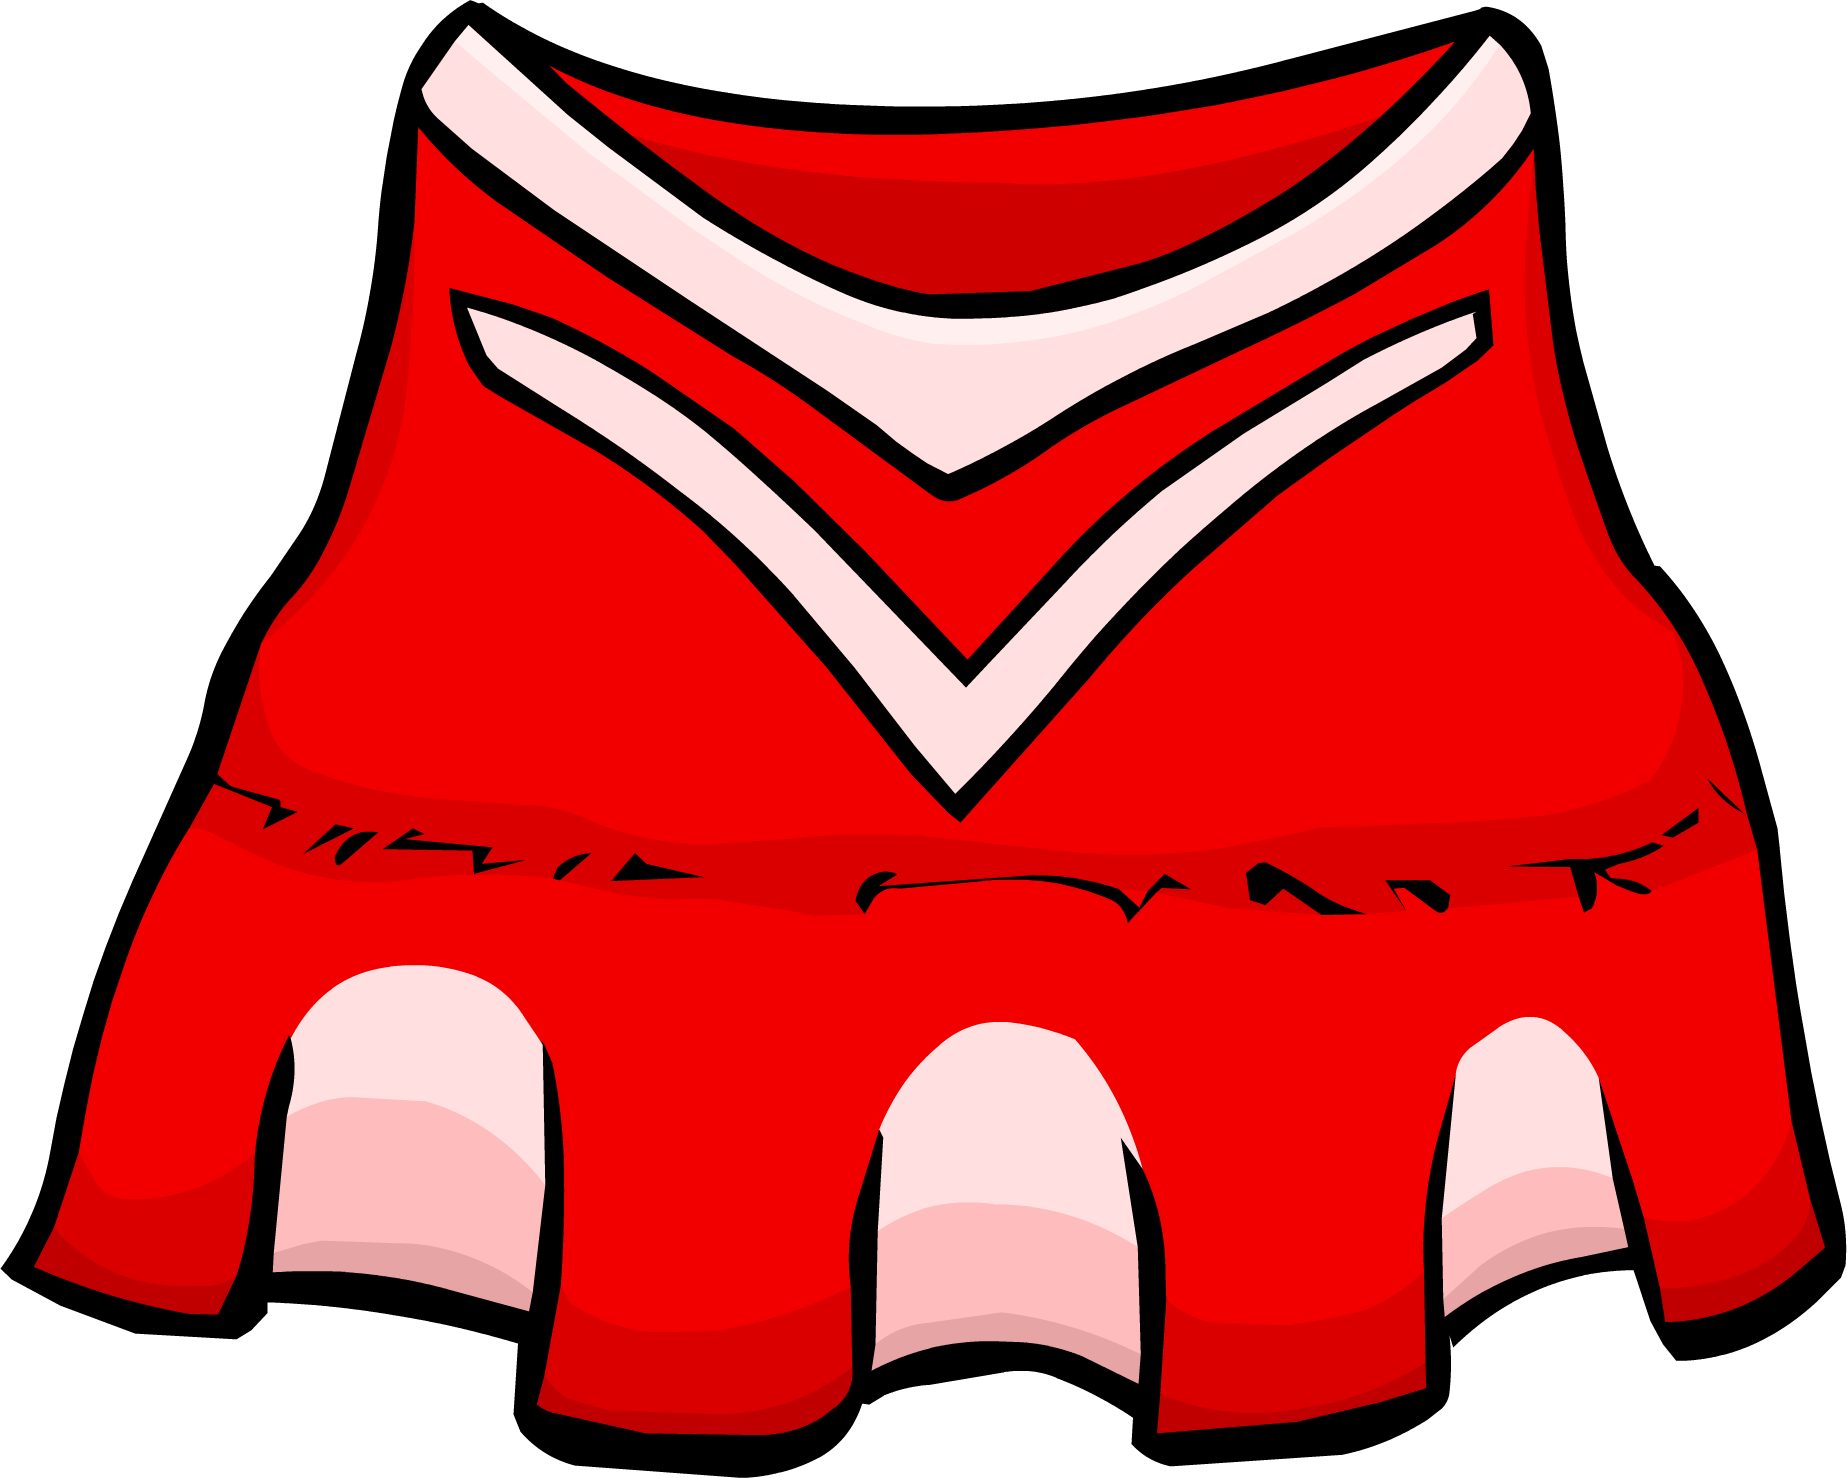 Red Cheerleader Outfit - Club Penguin Cheerleader Outfit (1847x1478)